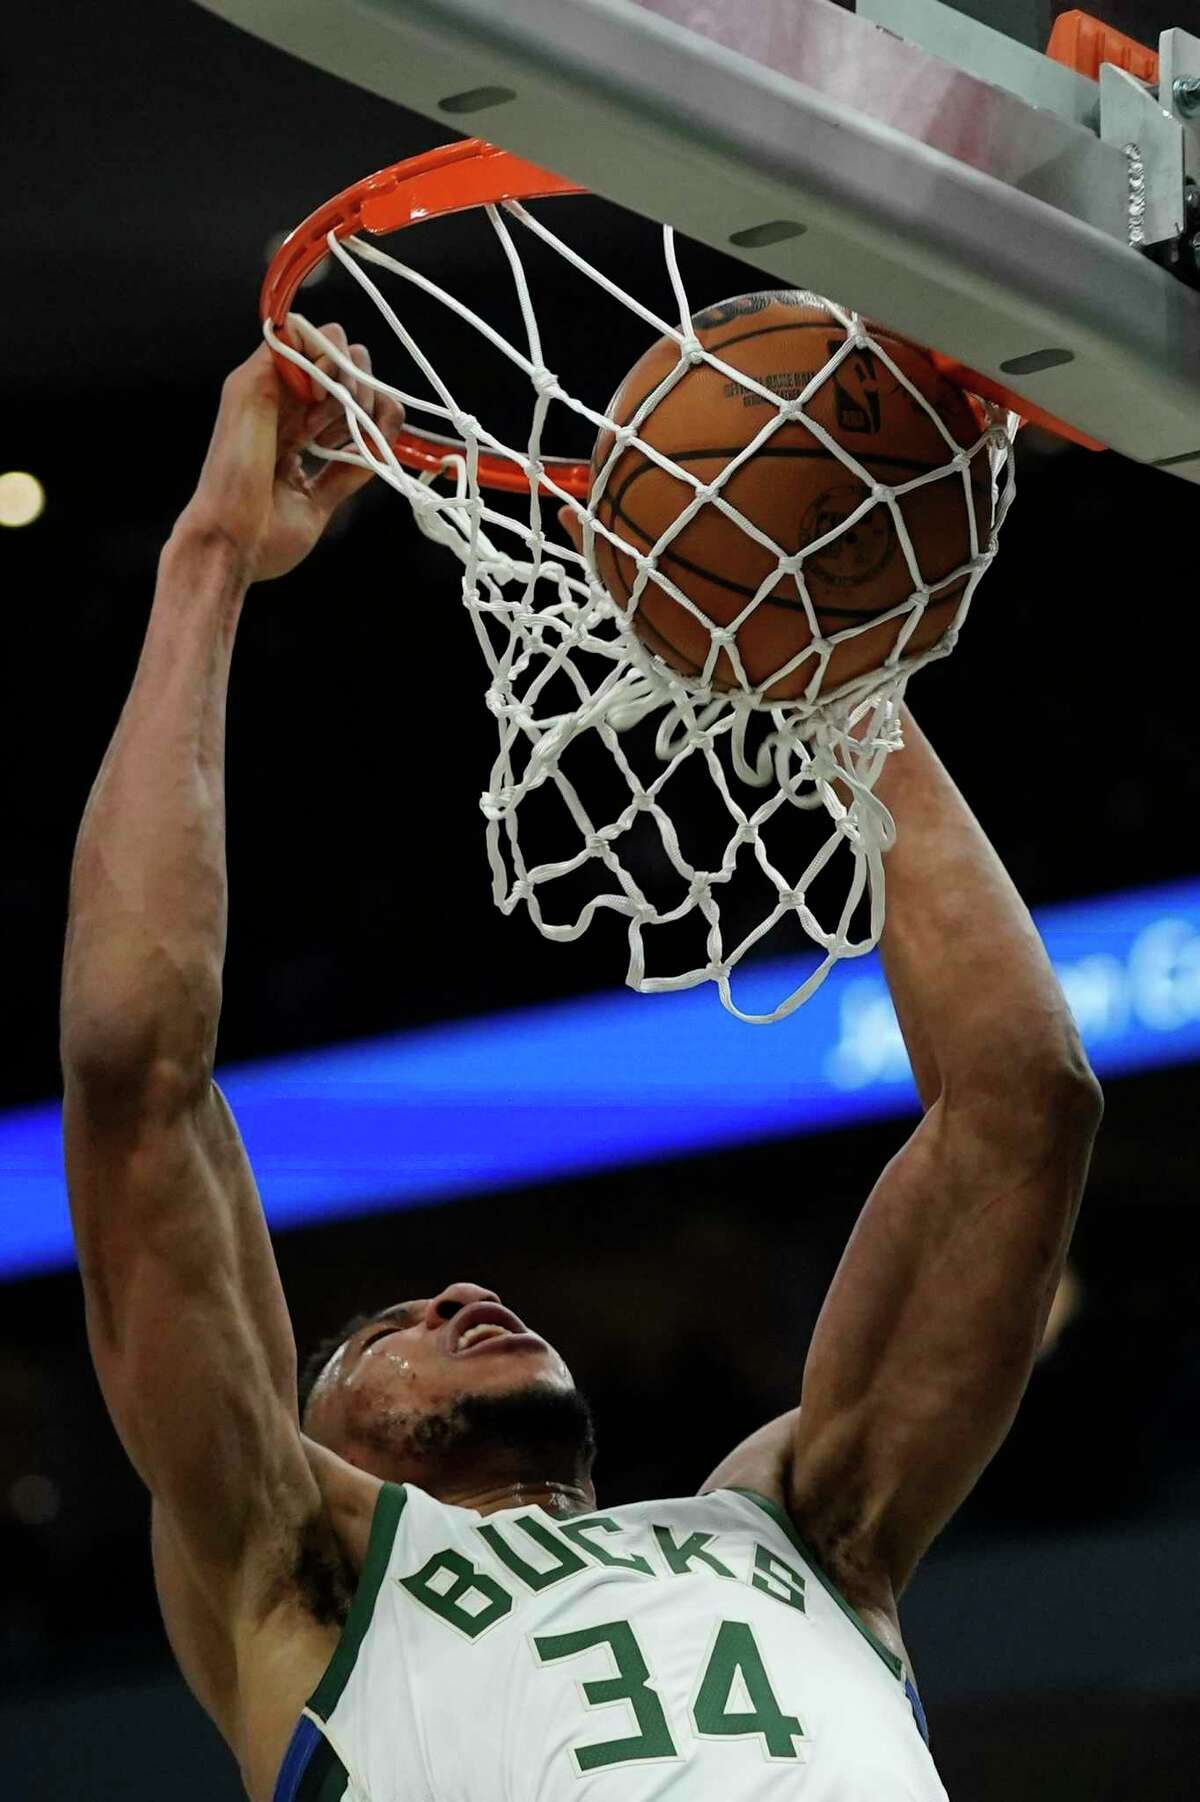 Milwaukee Bucks' Giannis Antetokounmpo dunks during the second half of an NBA basketball game against the Golden State Warriors Thursday, Jan. 13, 2022, in Milwaukee. (AP Photo/Morry Gash)